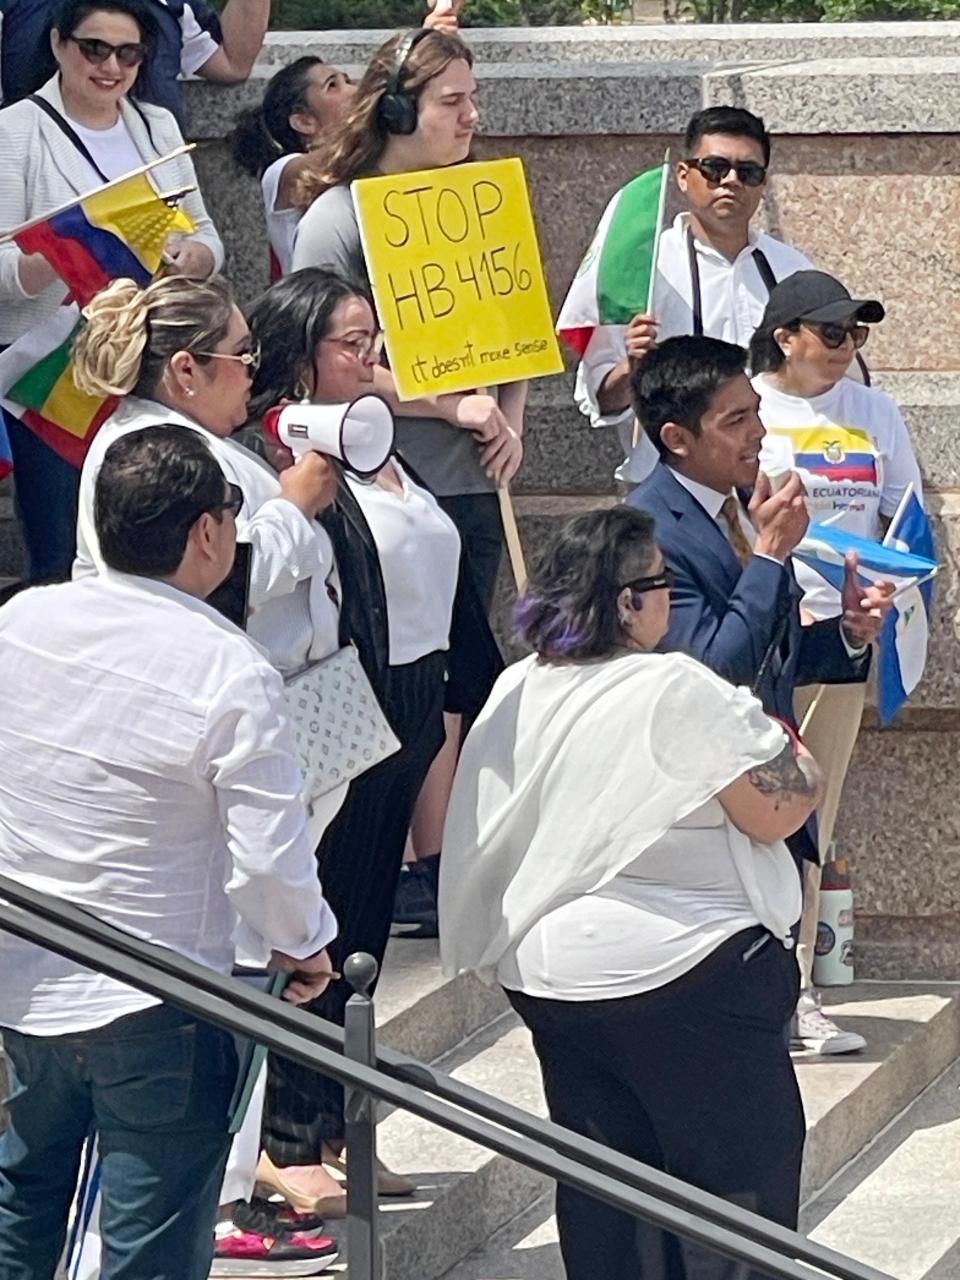 State Rep. Arturo Alonso-Sandoval speaks to a crowd on the north Capitol plaza in late April. The group assembled to express opposition to the bill signed Tuesday by Gov. Kevin Stitt to give state law enforcement officials authority to arrest people without legal documentation to be in the United States. About 70% of Alonso Sandoval’s District 89 is Hispanic.